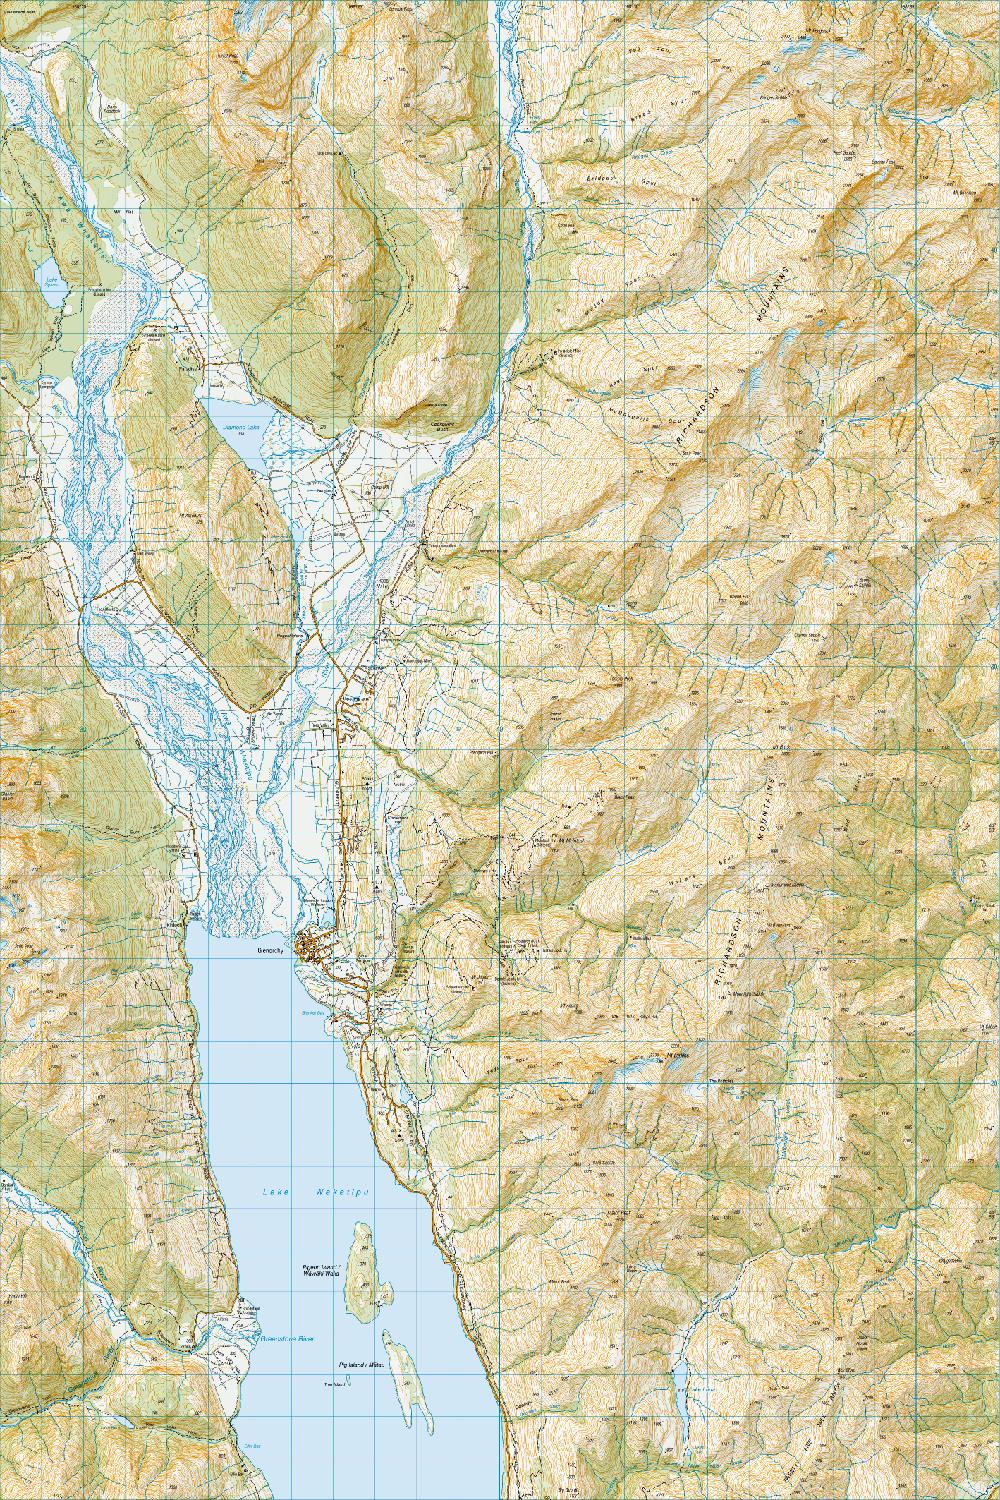 Topo map of Glenorchy